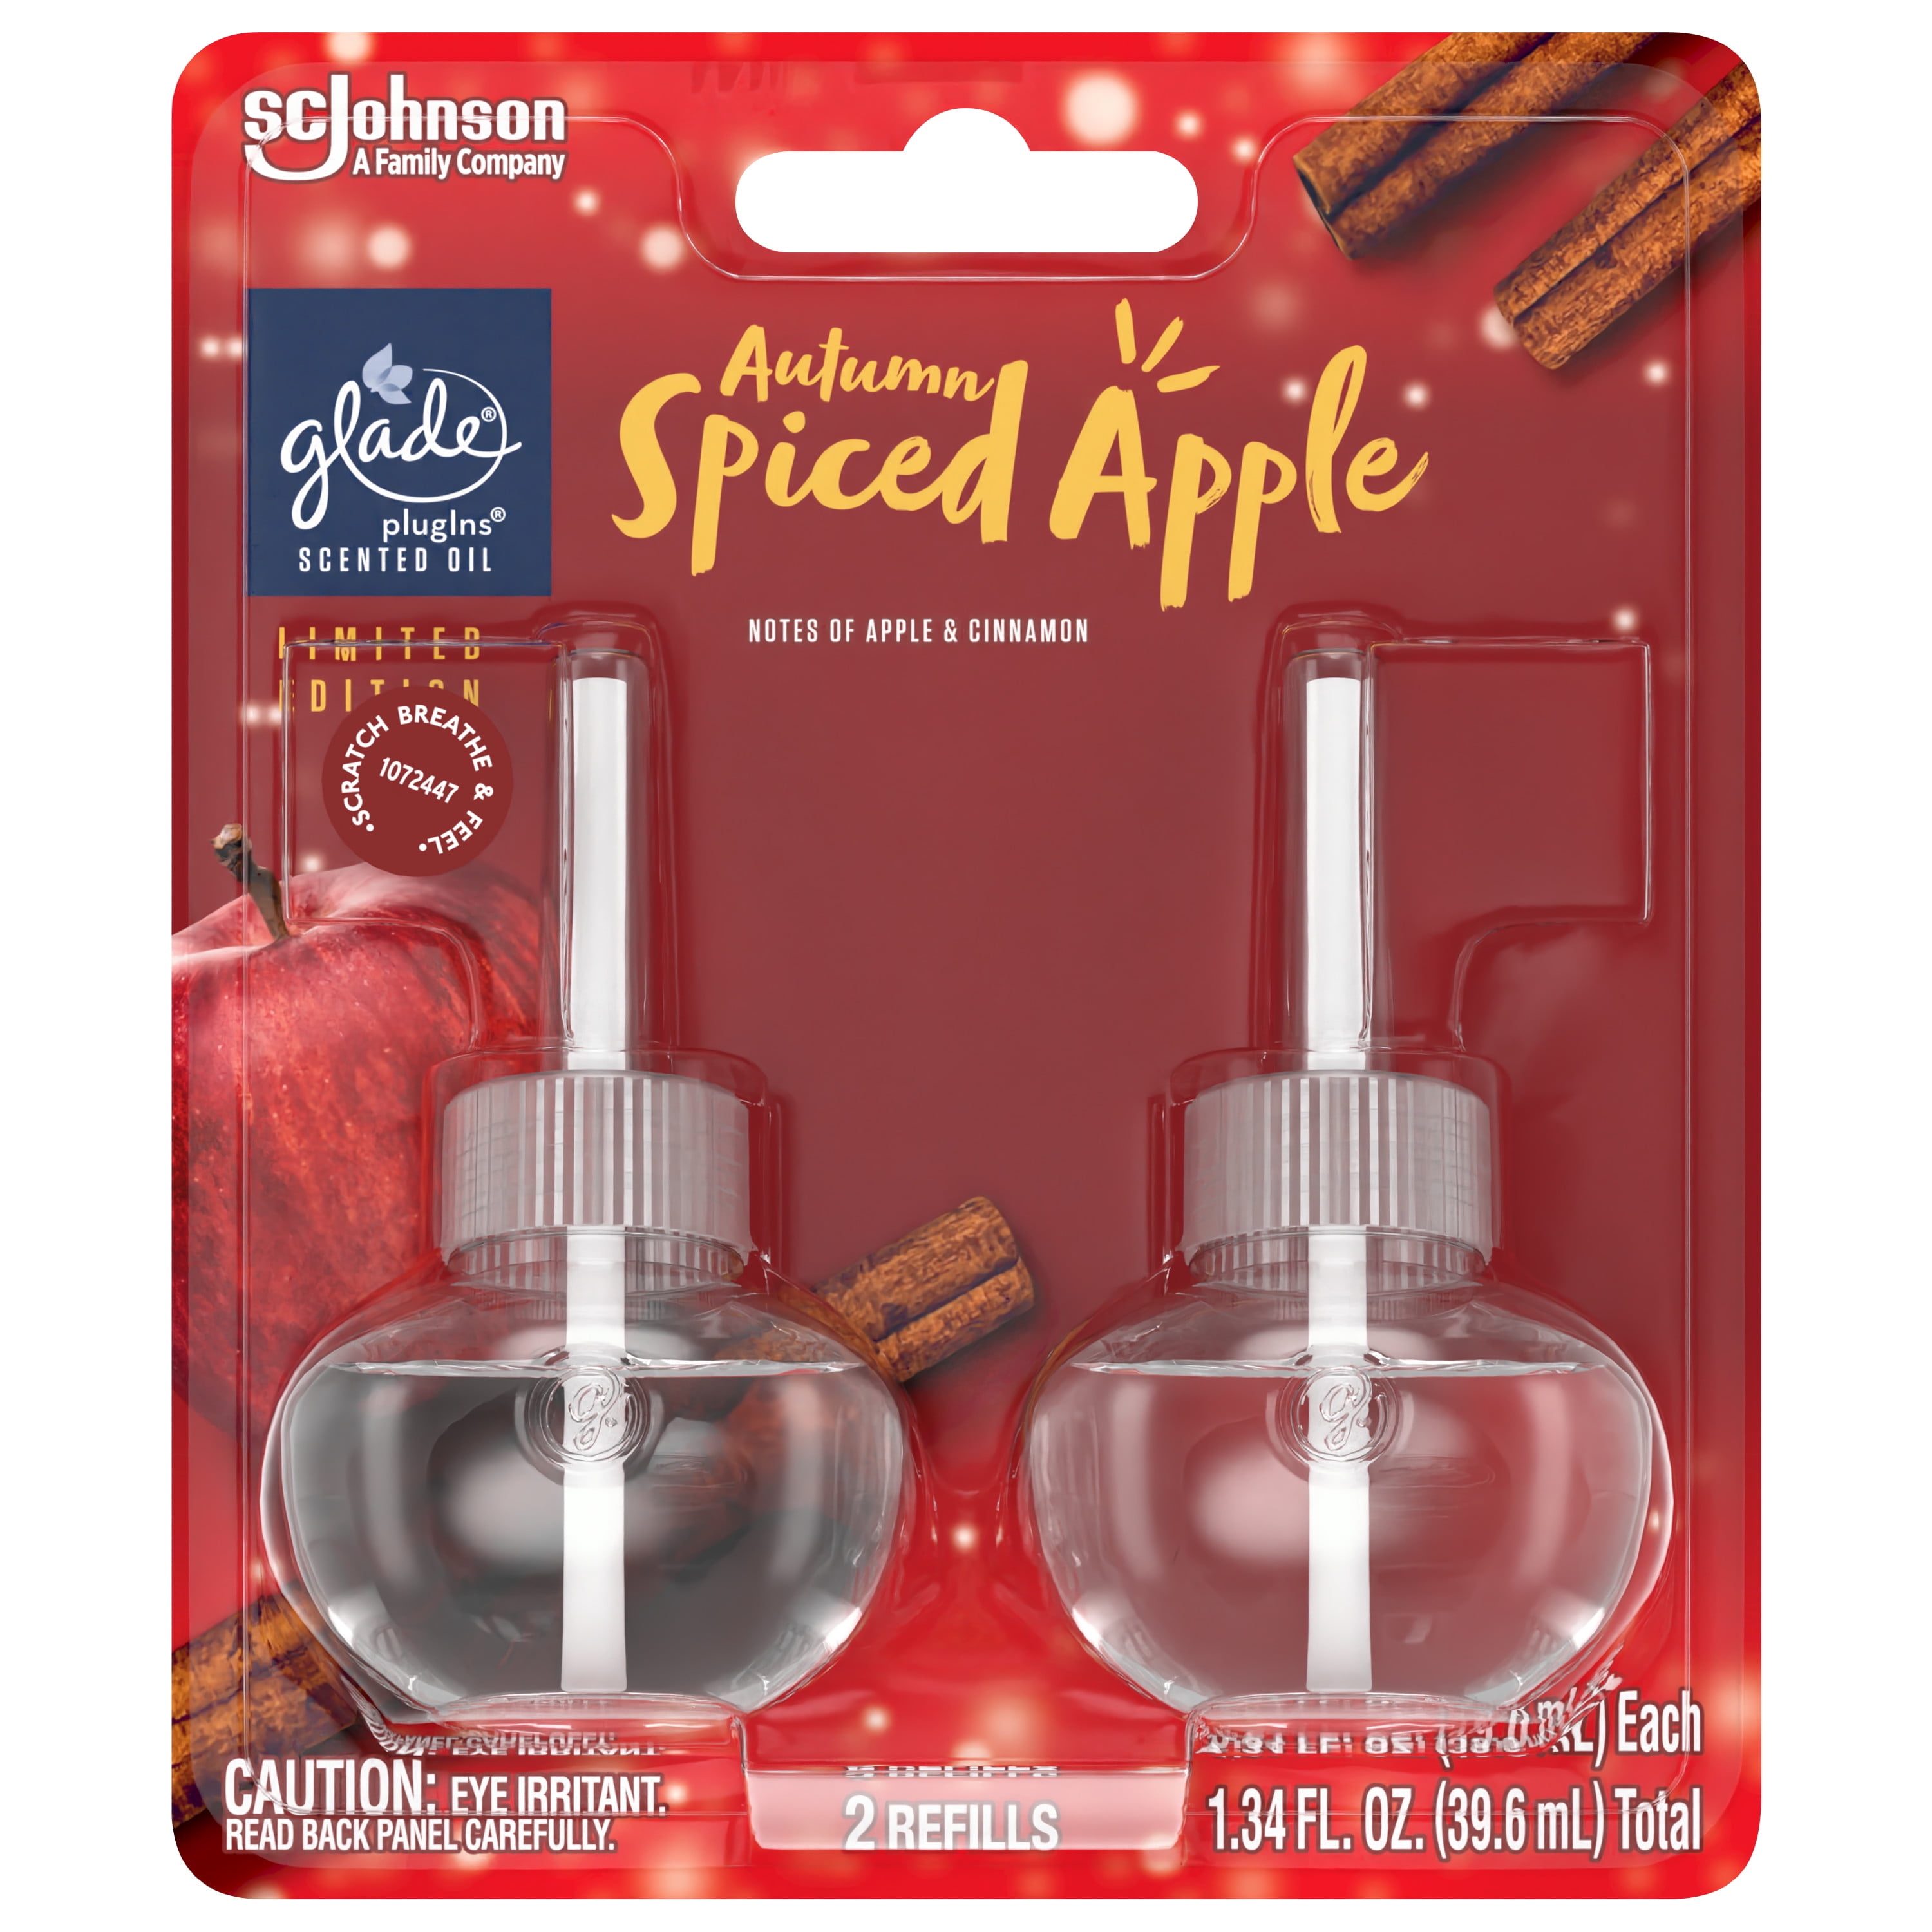 Glade PlugIns Scented Oil Refill, Essential Oil Infused Wall Plug In (6.39  fl. oz., 9 ct.) Apple Cinnamon - HapyDeals